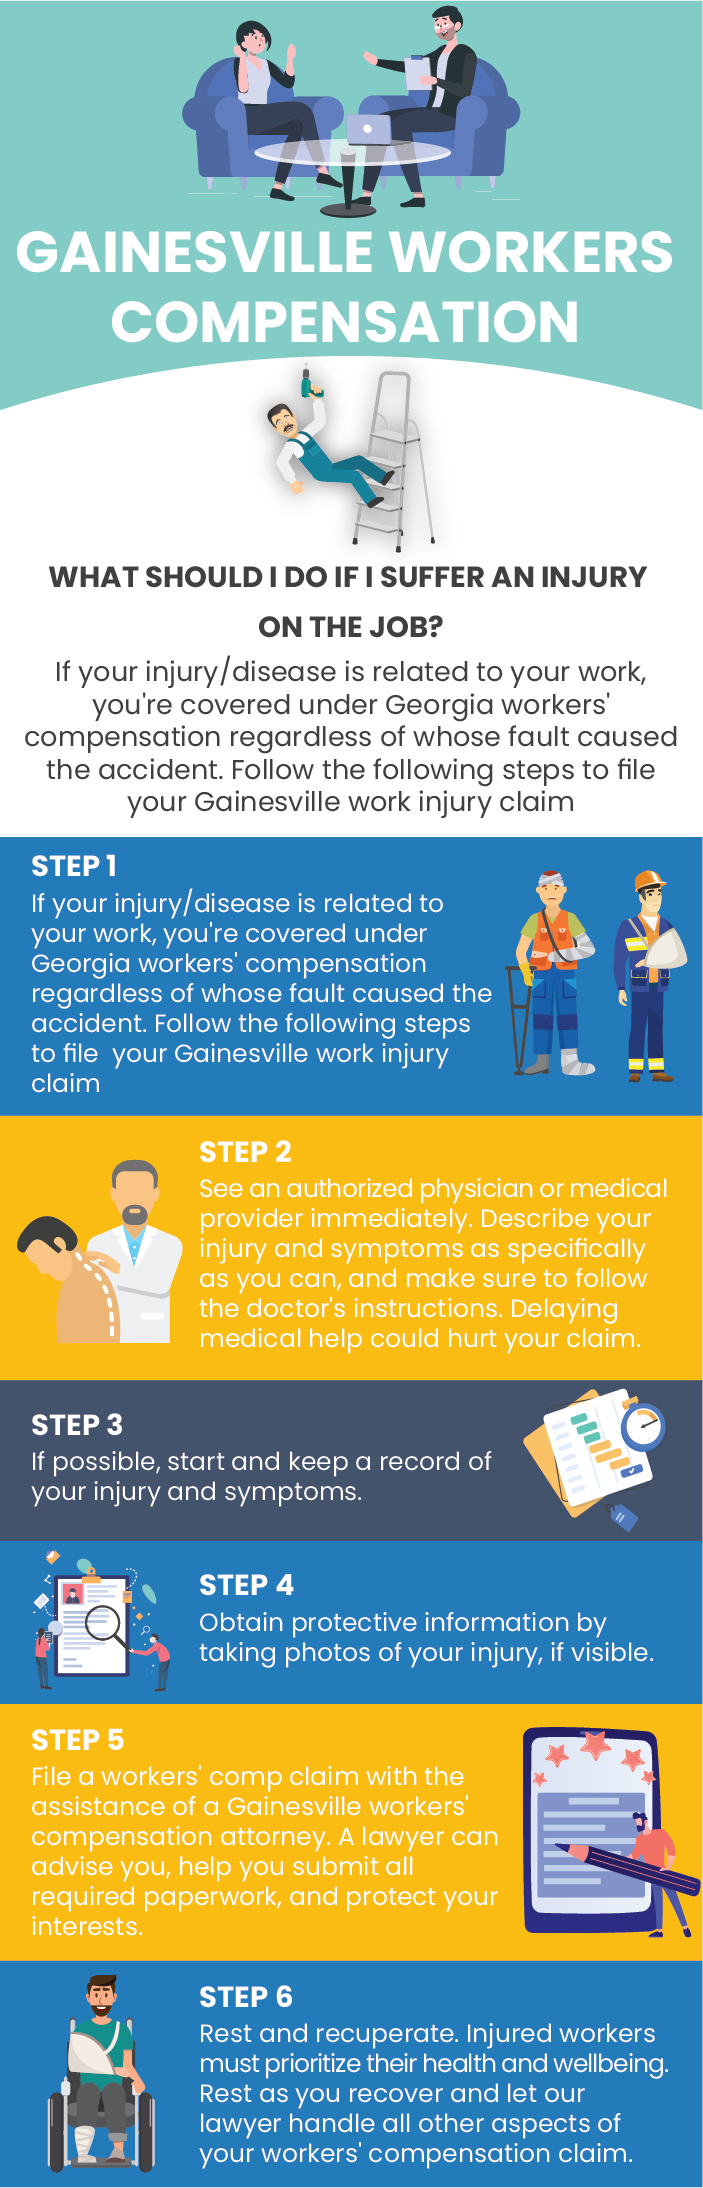 Gainesville Workers Compensation Infographic